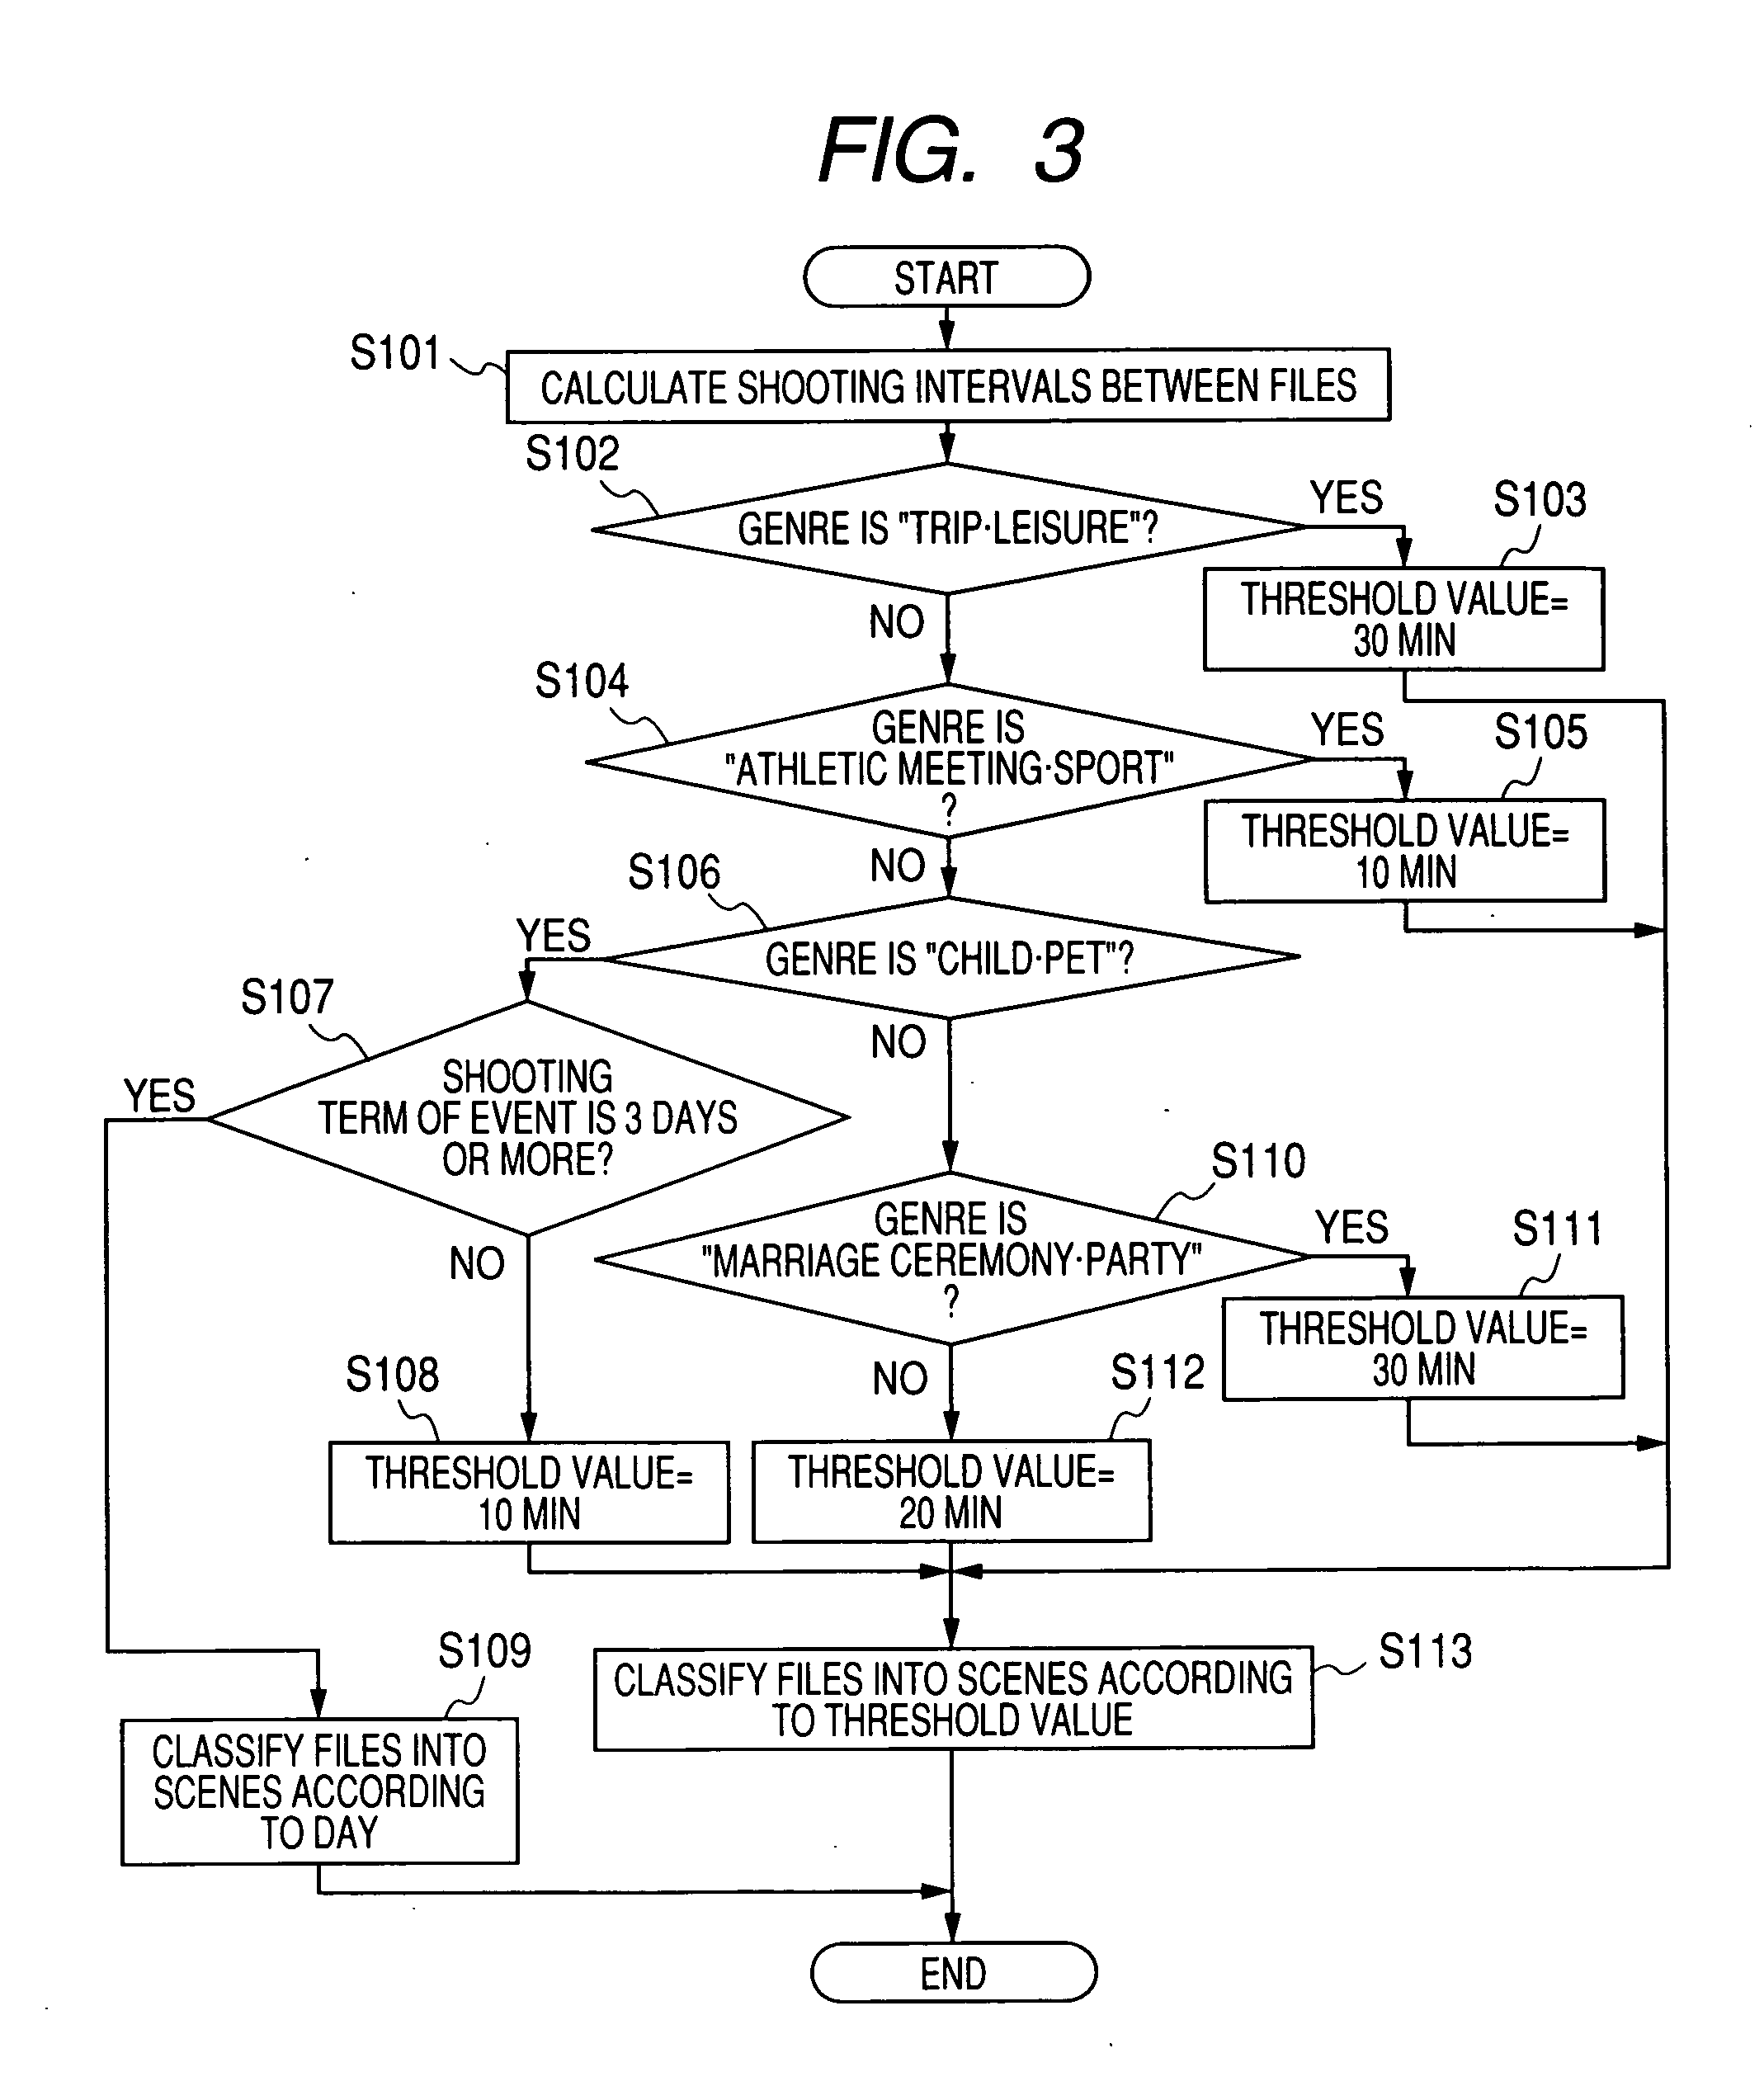 Method and apparatus for generating digest of captured images